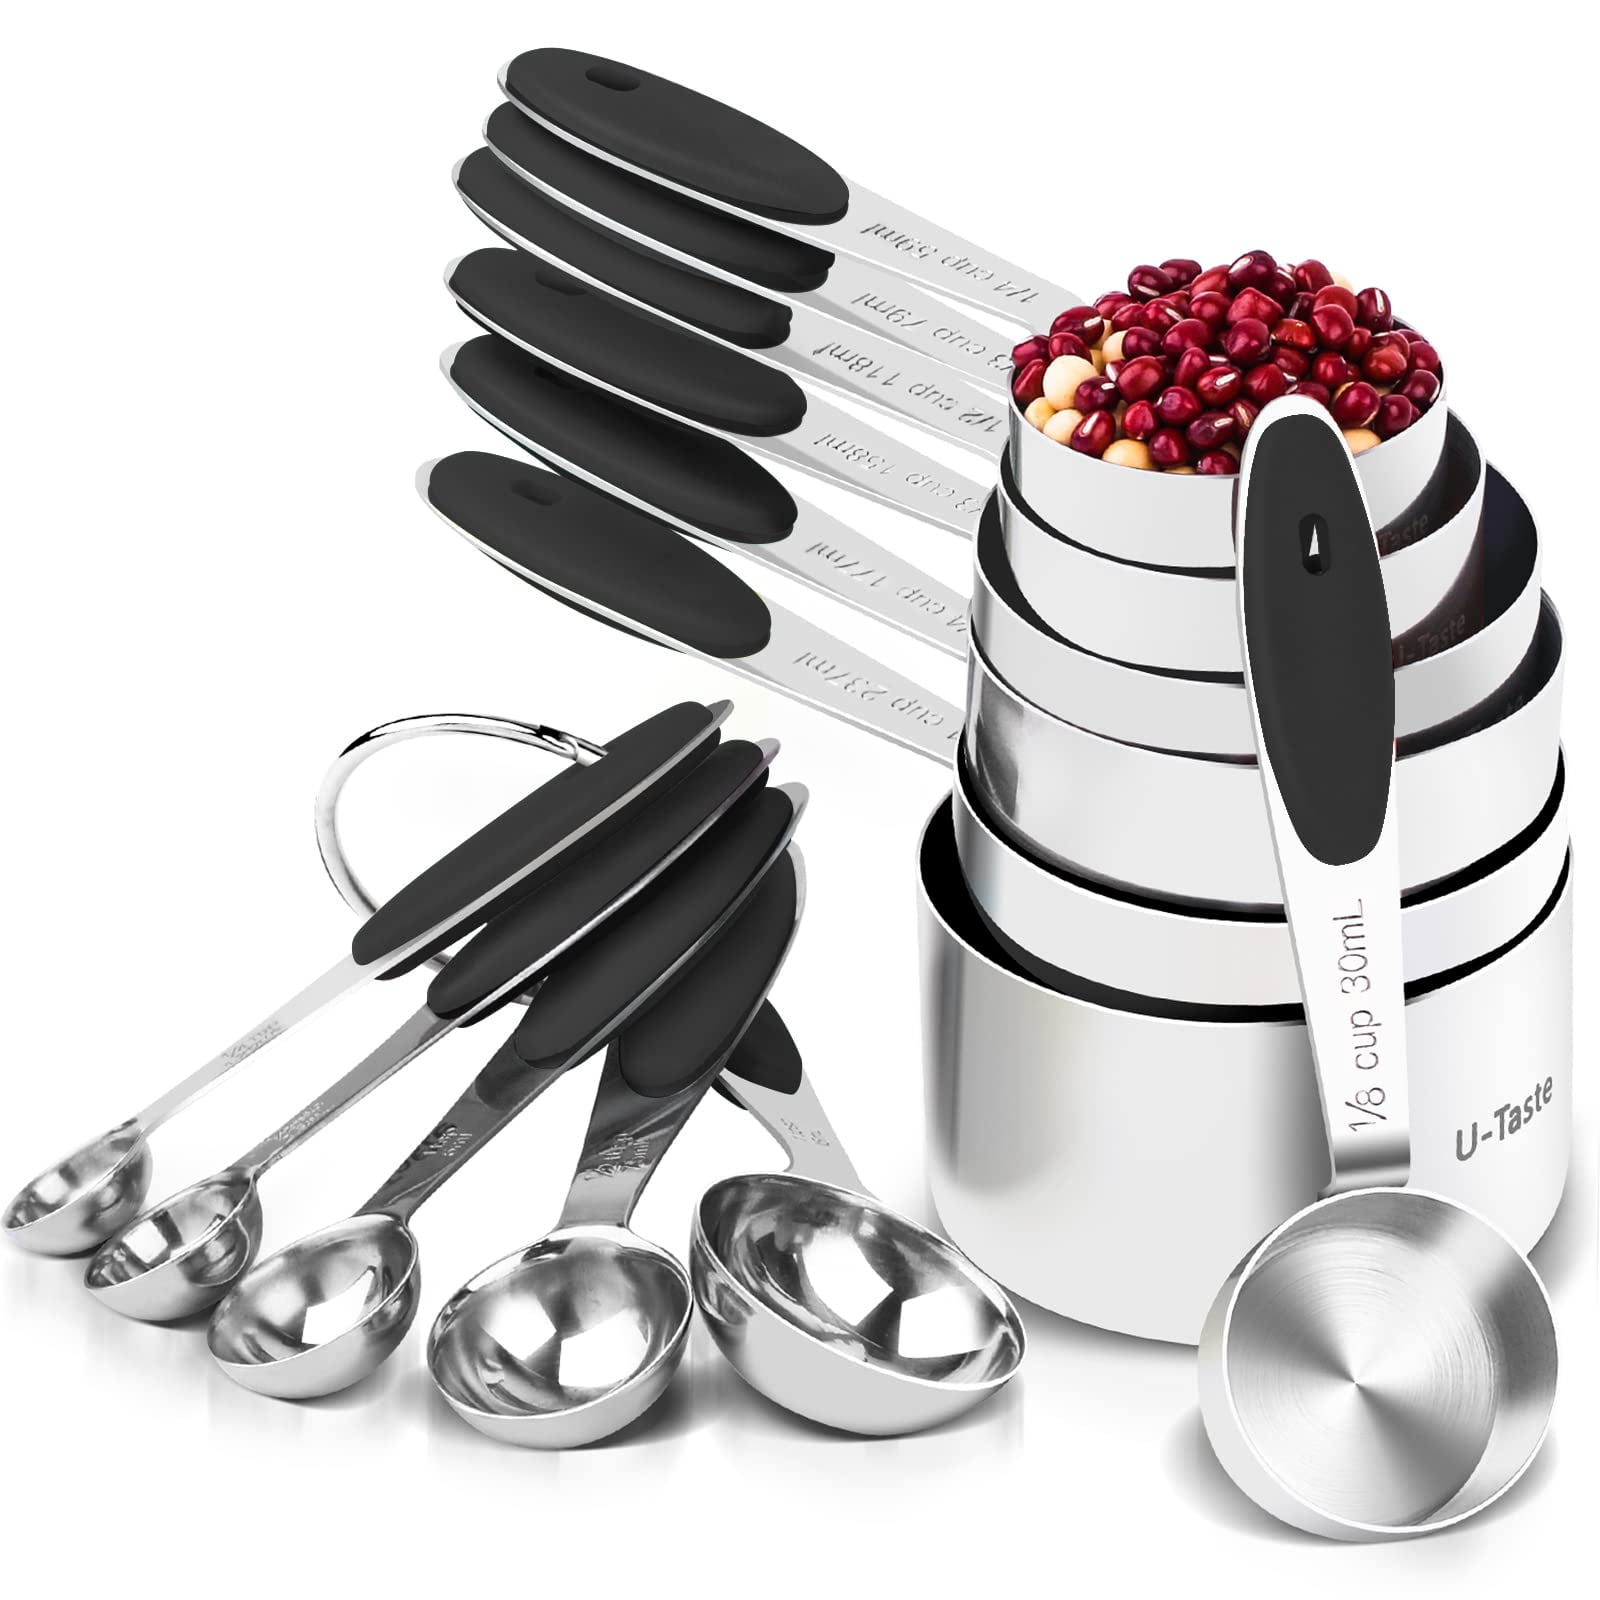 Costco' 15-Piece Measuring Cup and Magnetic Spoon Set Is Just $18 - Parade